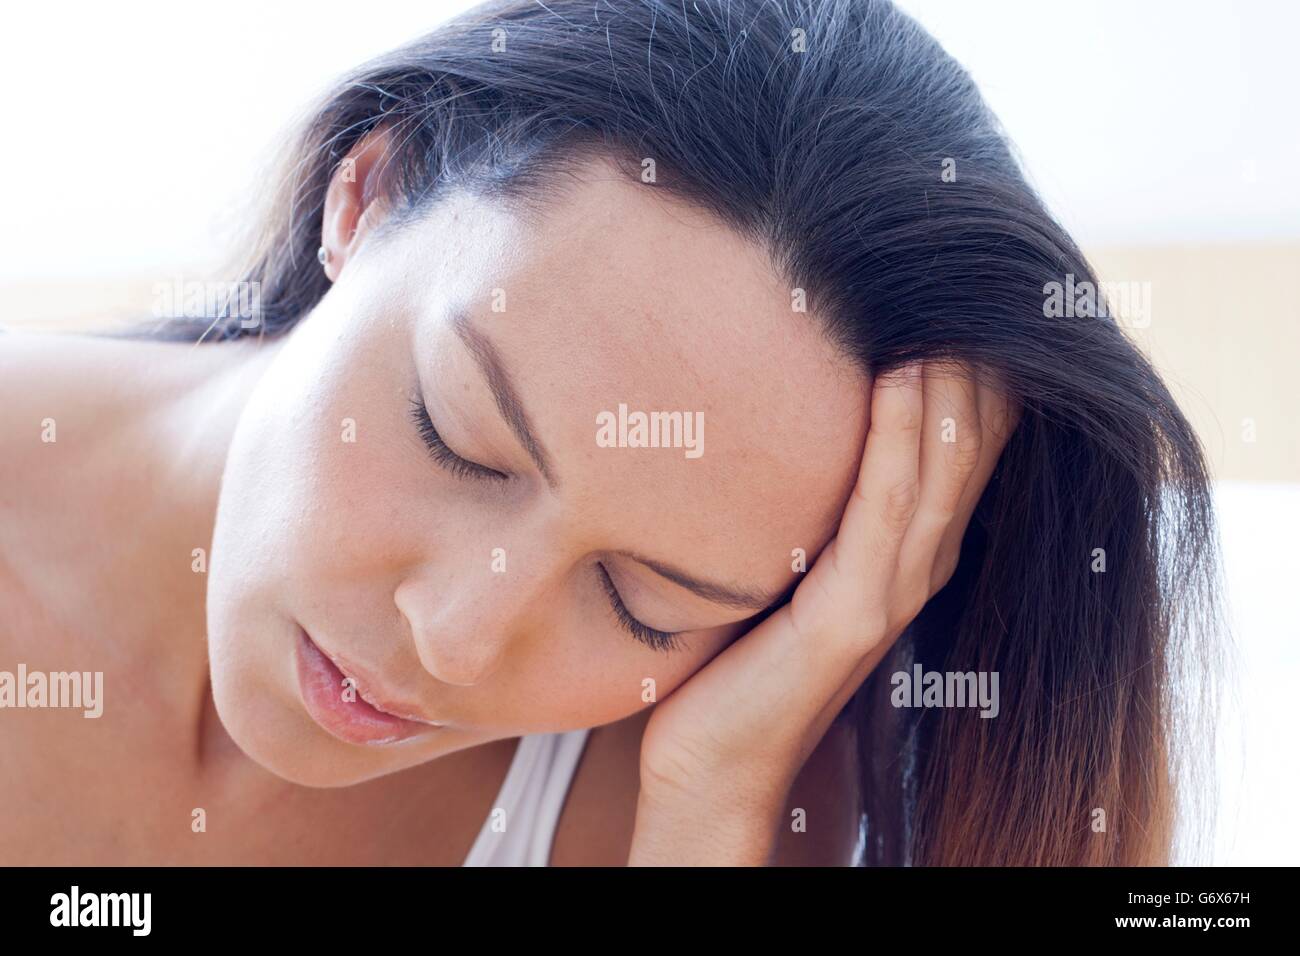 MODEL RELEASED. Tired young woman with her eyes closed. Stock Photo